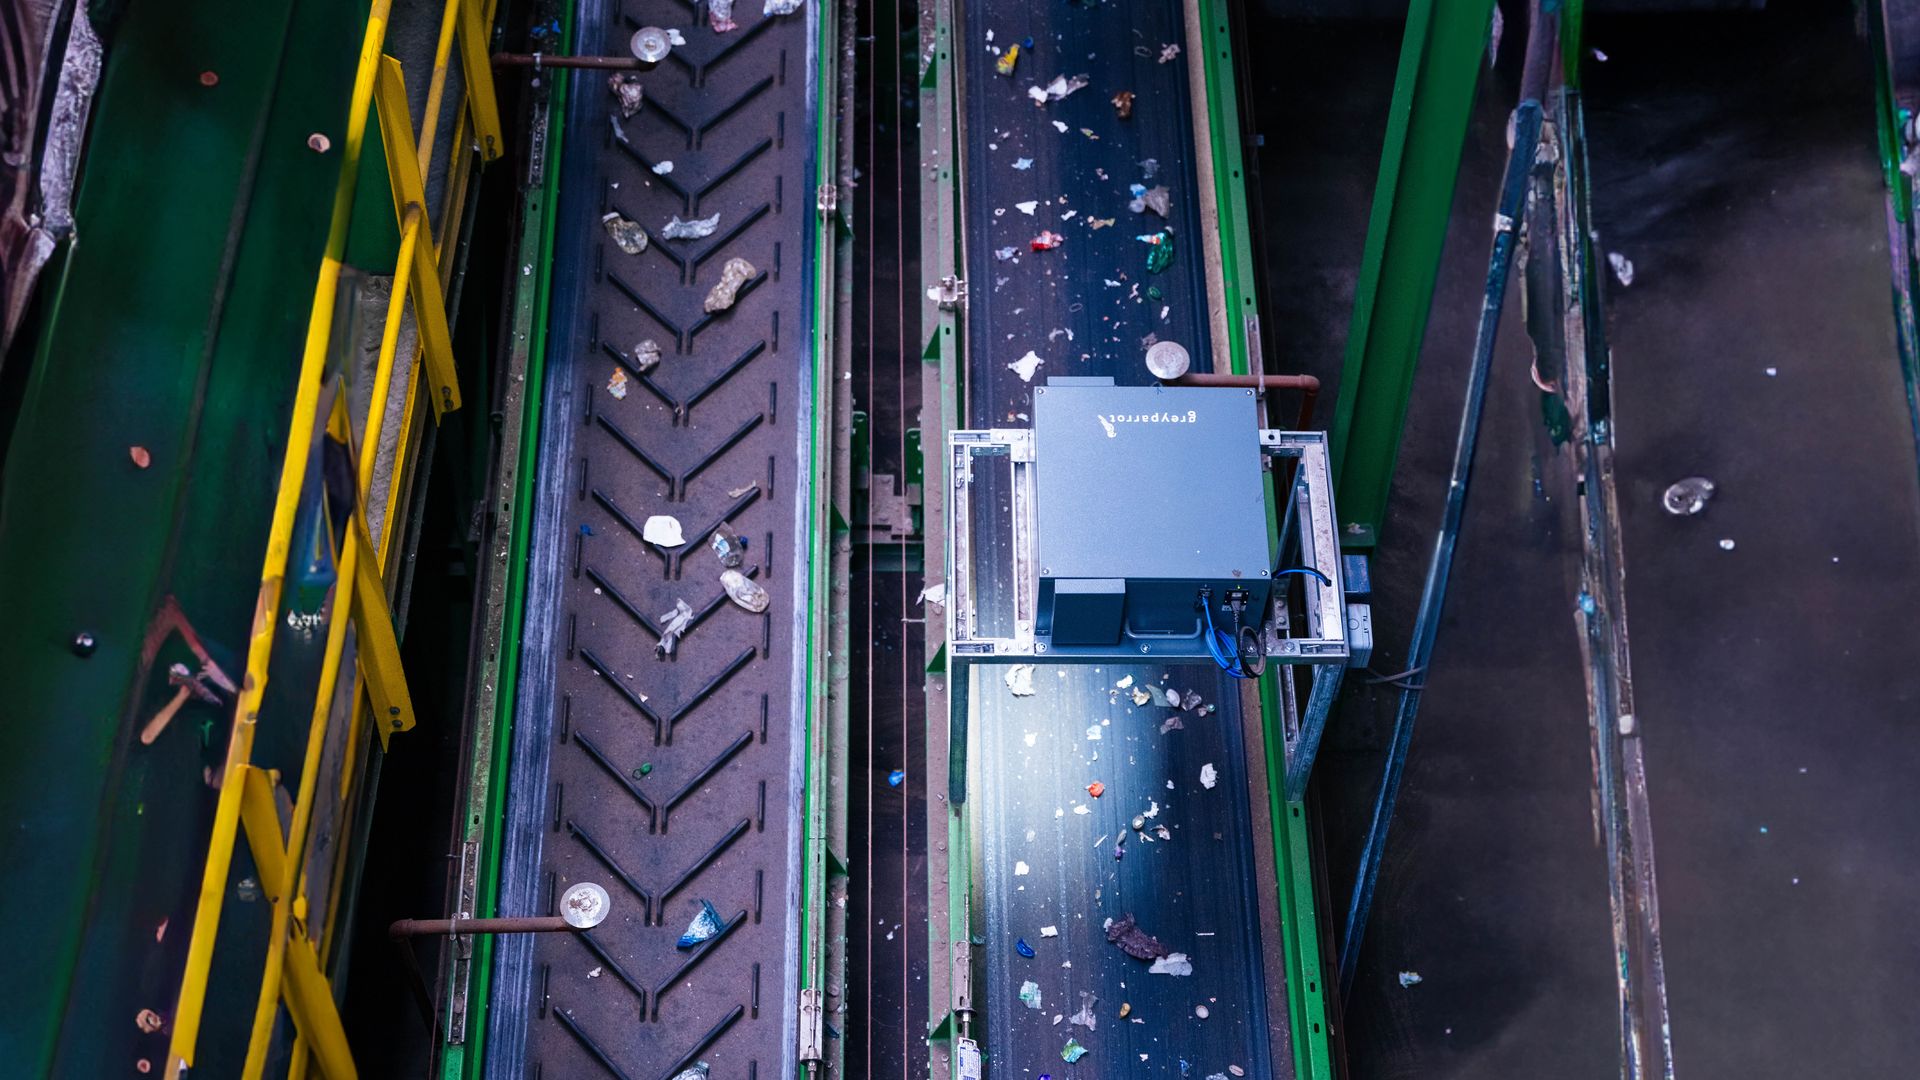 A machine made by startup Greyparrot uses AI to analyze recycled materials